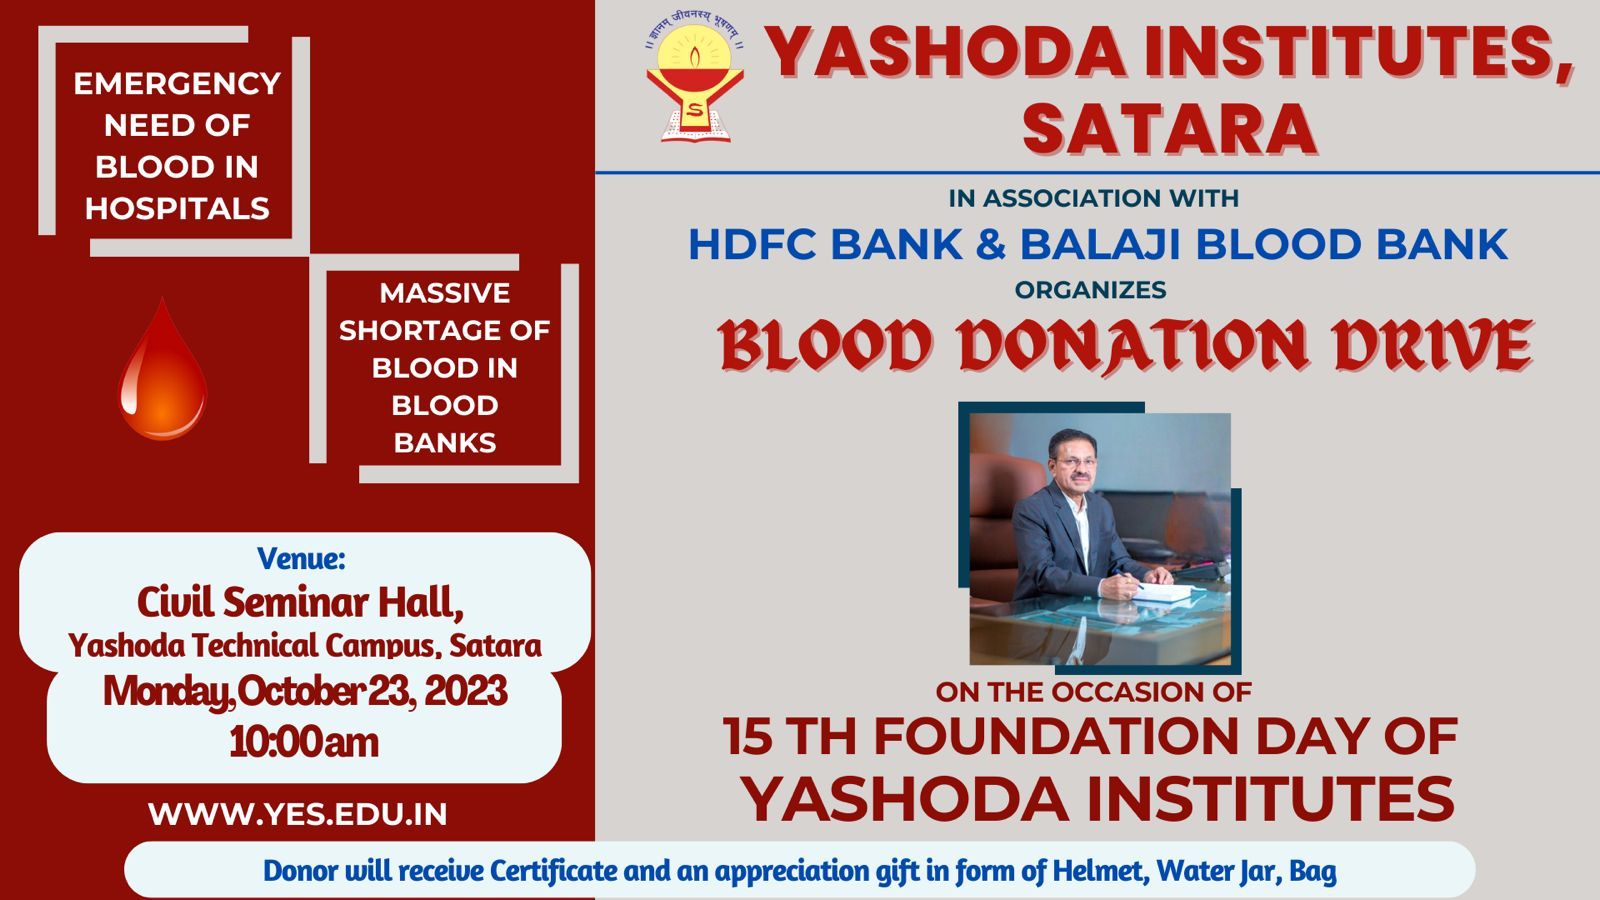 Appeal for Blood Donation